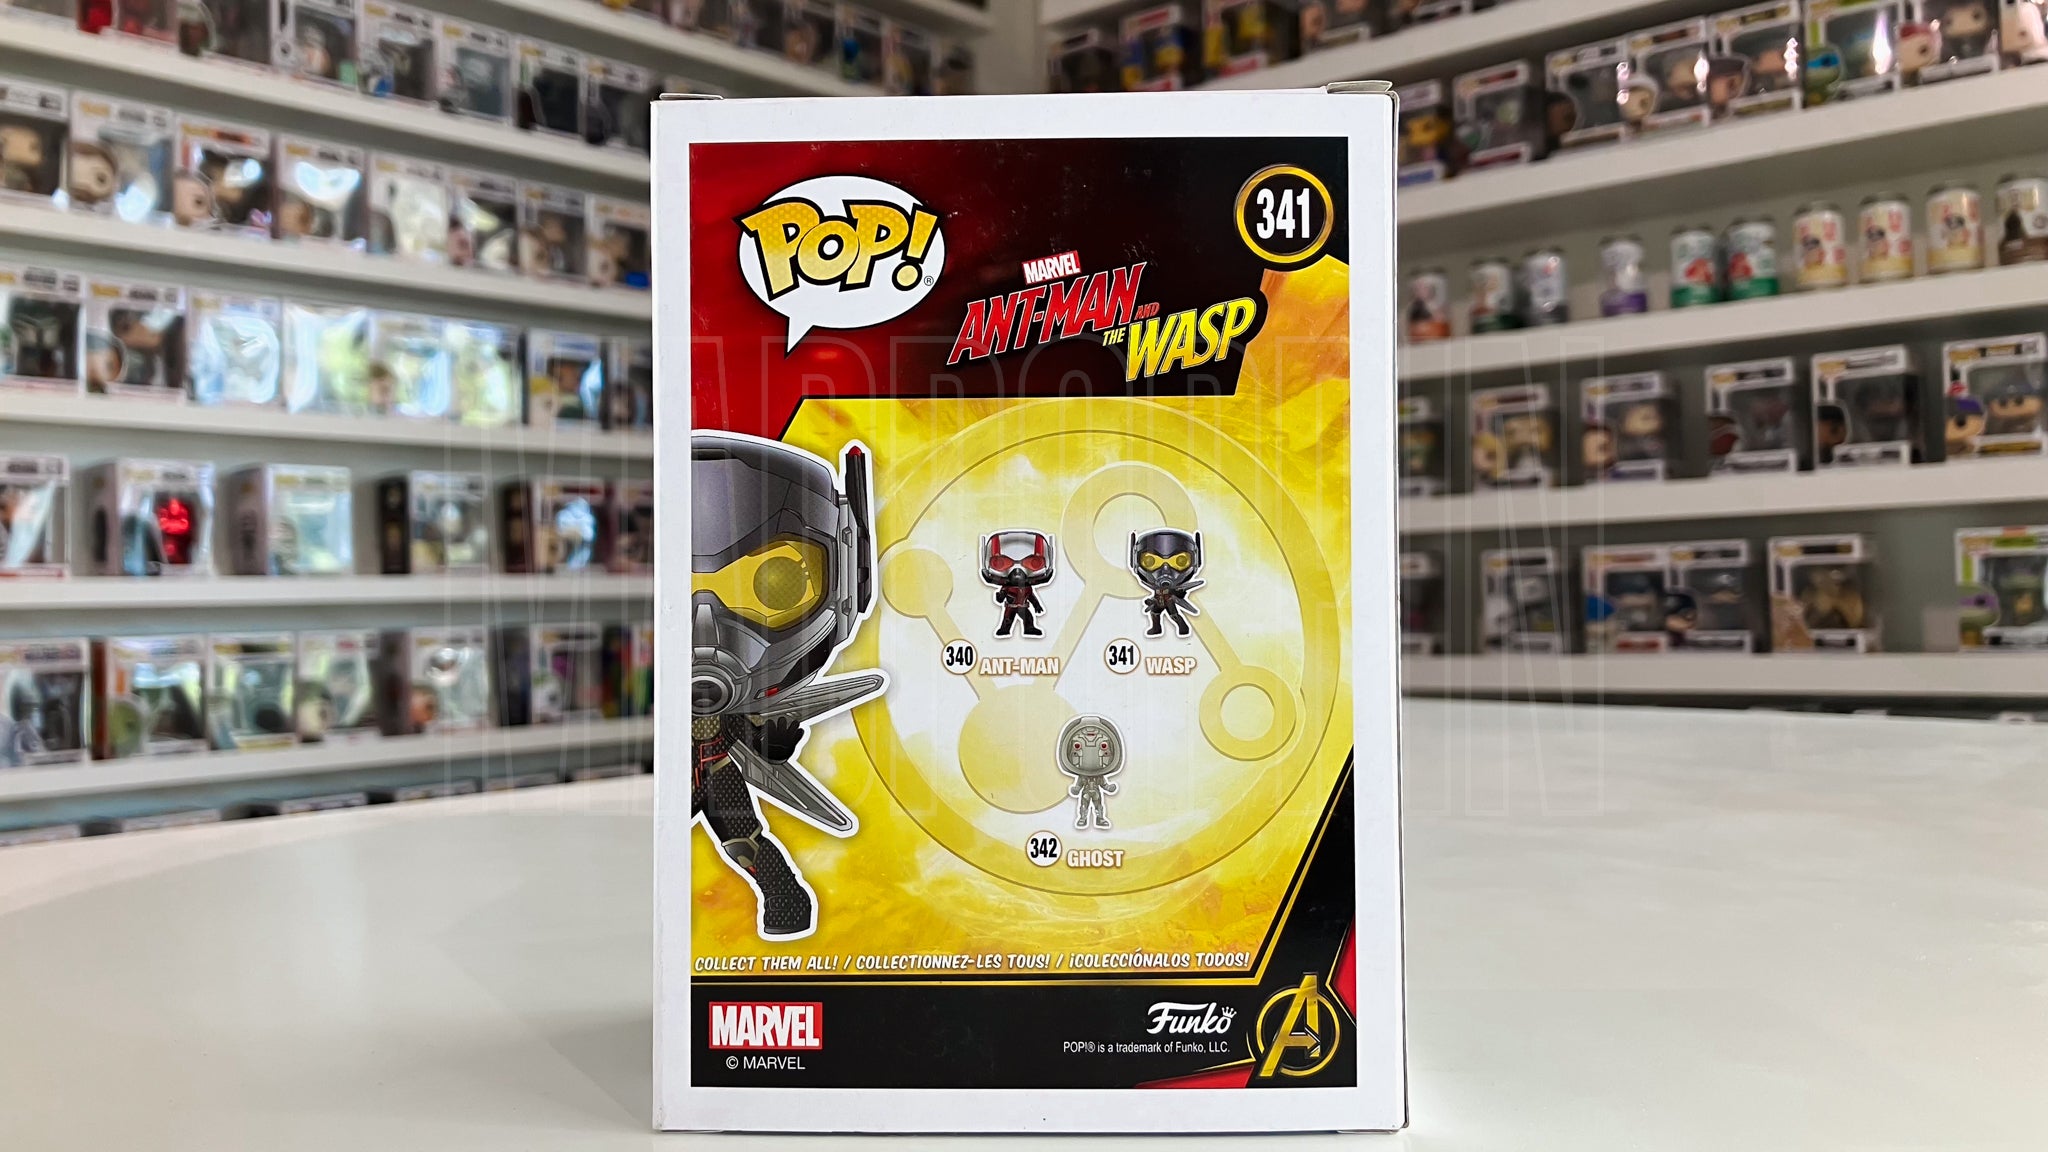 Funko Pop Marvel Ant-Man & The Wasp - Wasp 341